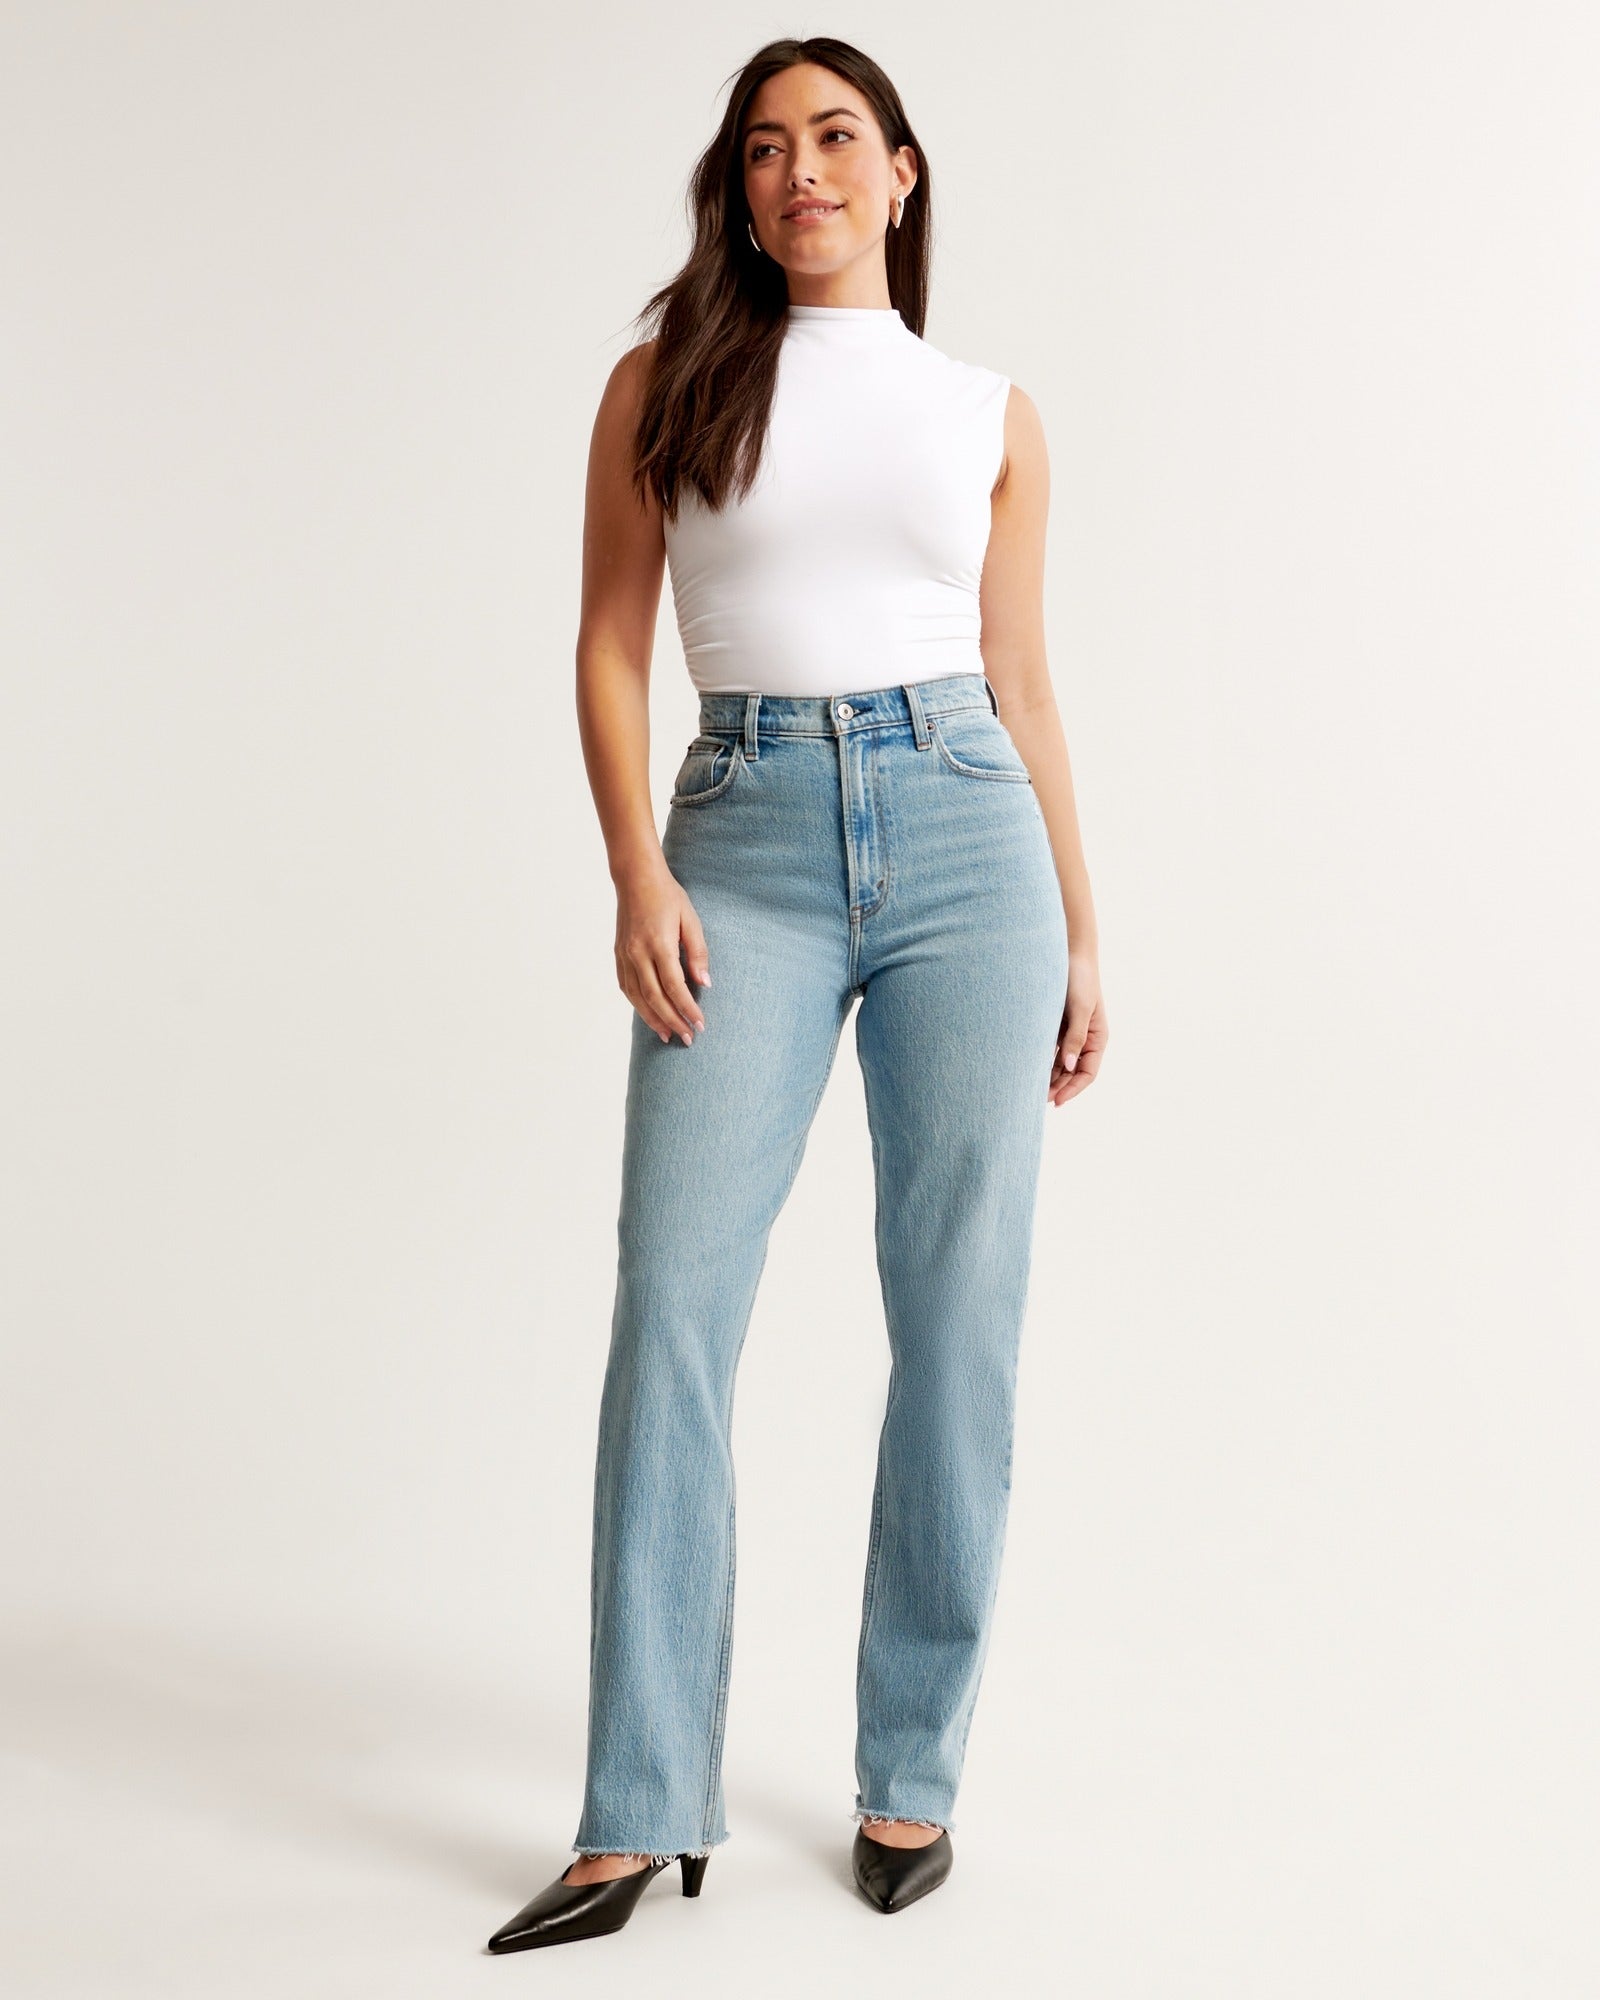 If You're Ready To Try A New Denim Look, Here Are 28 Pairs Of Jeans That  Aren't Skinny